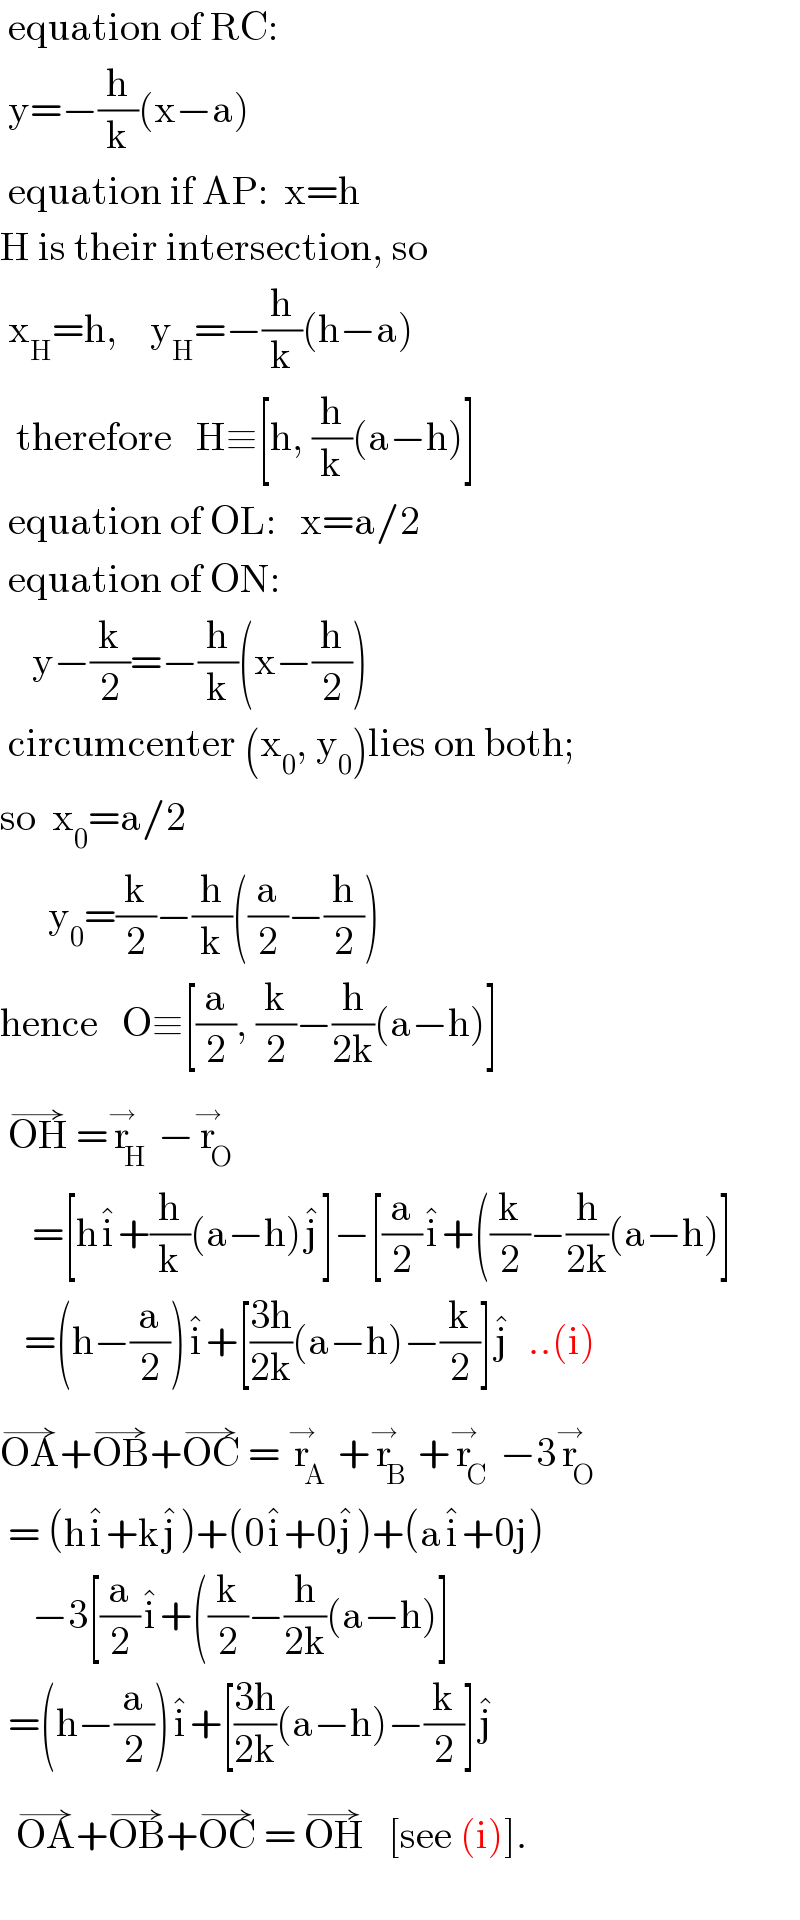  equation of RC:   y=−(h/k)(x−a)      equation if AP:  x=h  H is their intersection, so   x_H =h,    y_H =−(h/k)(h−a)    therefore   H≡[h, (h/k)(a−h)]   equation of OL:   x=a/2   equation of ON:      y−(k/2)=−(h/k)(x−(h/2))   circumcenter (x_0 , y_0 )lies on both;  so  x_0 =a/2        y_0 =(k/2)−(h/k)((a/2)−(h/2))  hence   O≡[(a/2), (k/2)−(h/(2k))(a−h)]   OH^(→)  =r_H ^→ −r_O ^→       =[hi^� +(h/k)(a−h)j^� ]−[(a/2)i^� +((k/2)−(h/(2k))(a−h)]     =(h−(a/2))i^� +[((3h)/(2k))(a−h)−(k/2)]j^�   ..(i)  OA^(→) +OB^(→) +OC^(→)  = r_A ^→ +r_B ^→ +r_C ^→ −3r_O ^→    = (hi^� +kj^� )+(0i^� +0j^� )+(ai^� +0j)      −3[(a/2)i^� +((k/2)−(h/(2k))(a−h)]   =(h−(a/2))i^� +[((3h)/(2k))(a−h)−(k/2)]j^�      OA^(→) +OB^(→) +OC^(→)  = OH^(→)    [see (i)].       